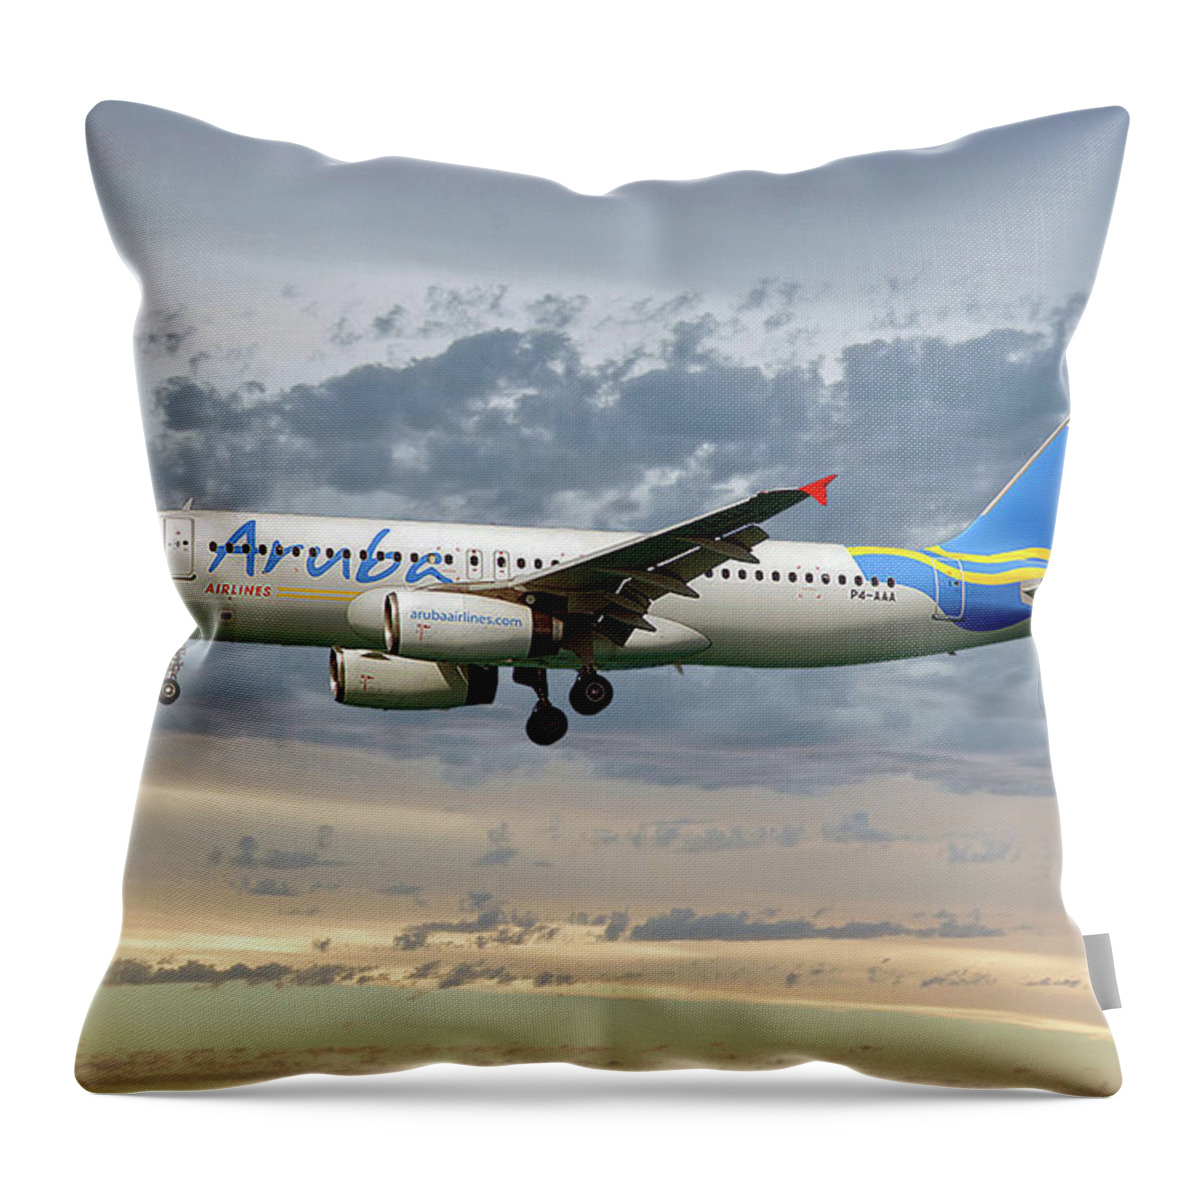 Aruba Throw Pillow featuring the photograph Aruba Airlines Airbus A320-232 114 by Smart Aviation